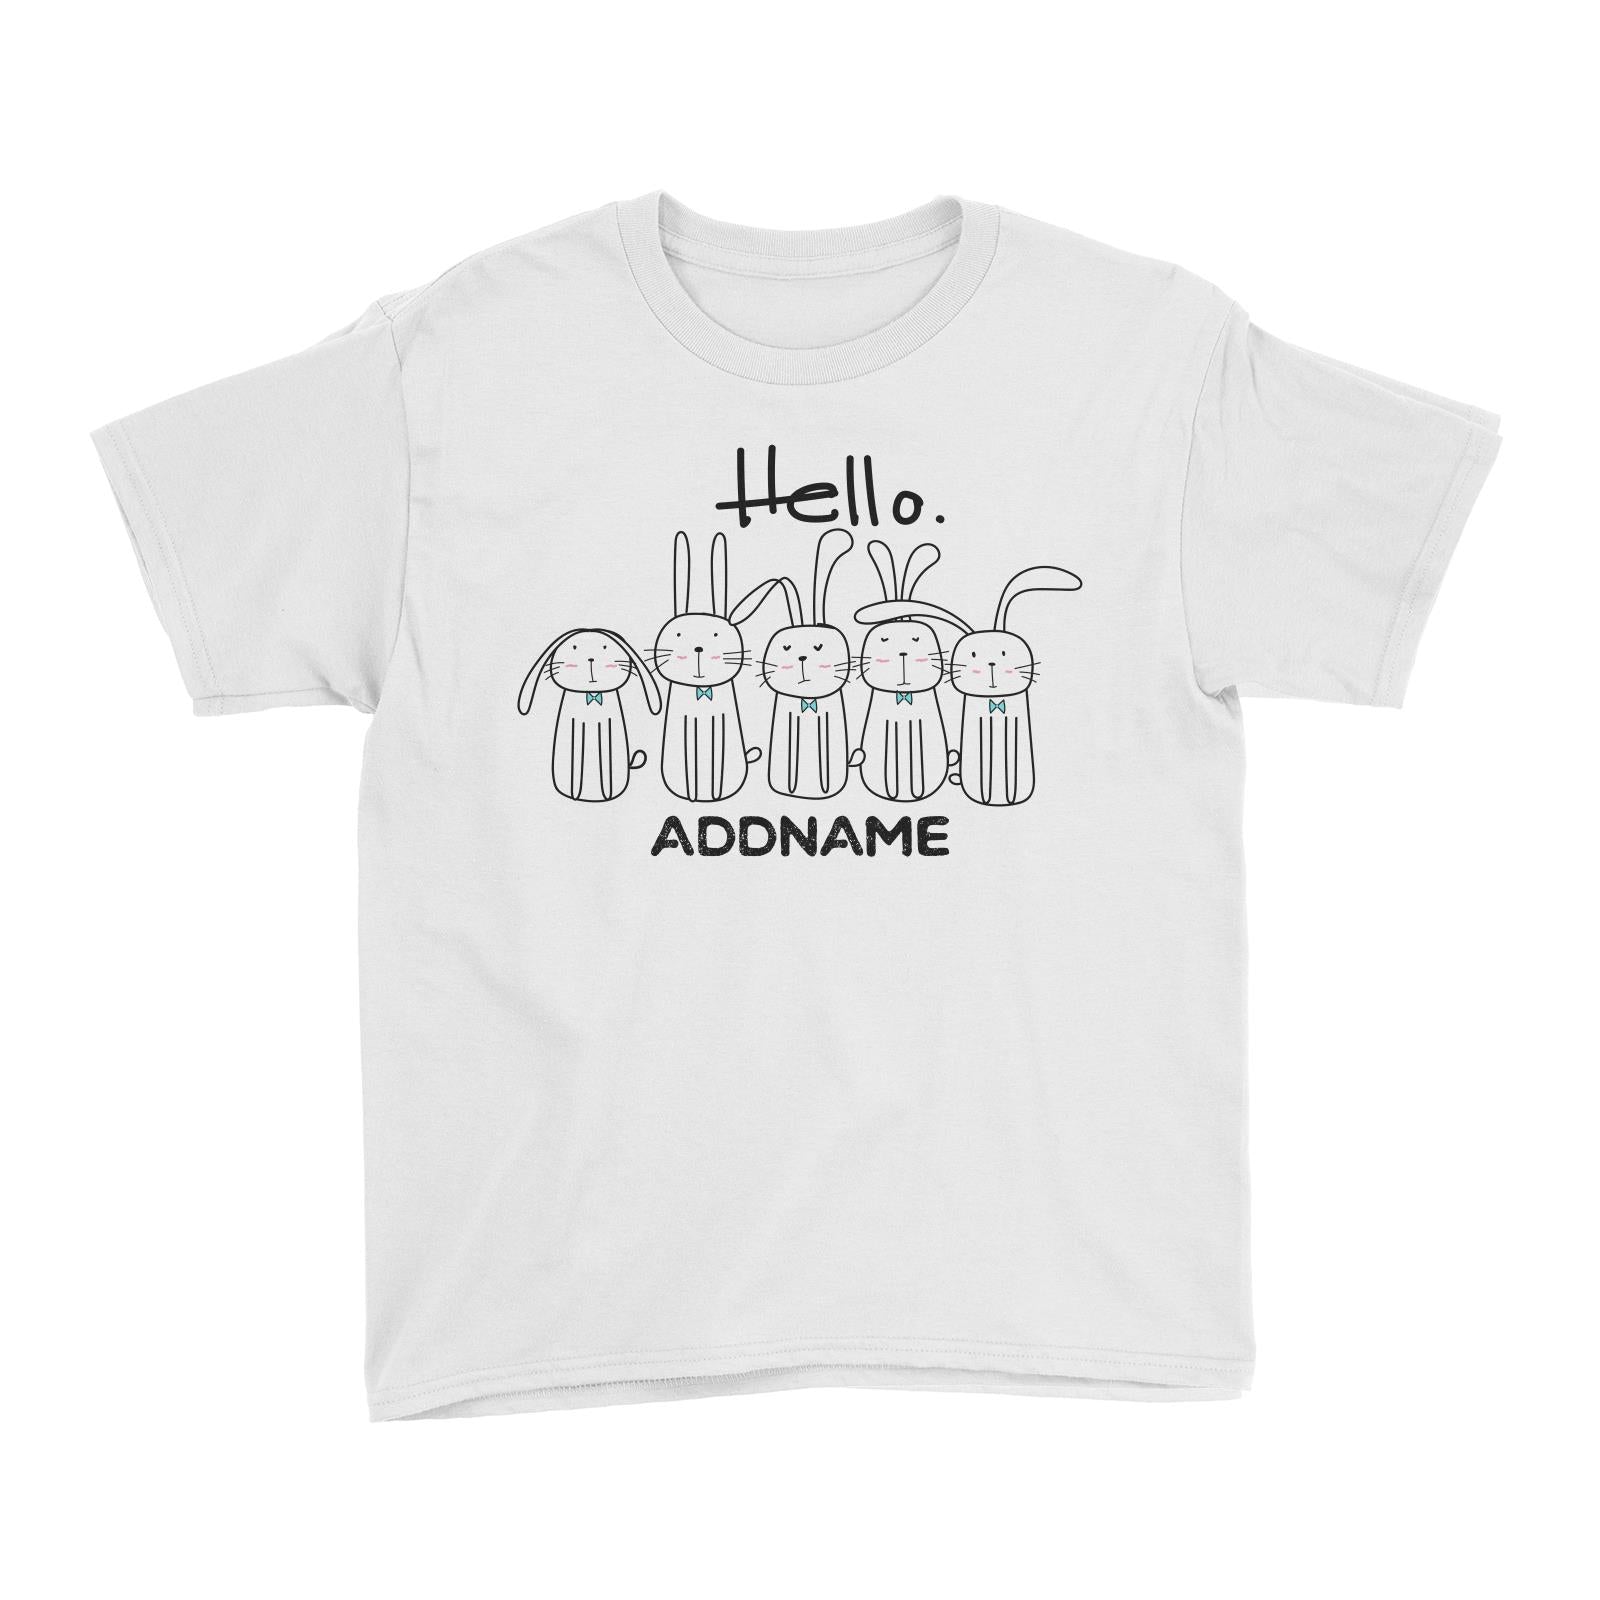 Cute Animals And Friends Series Hello Rabbits Group Addname Kid's T-Shirt